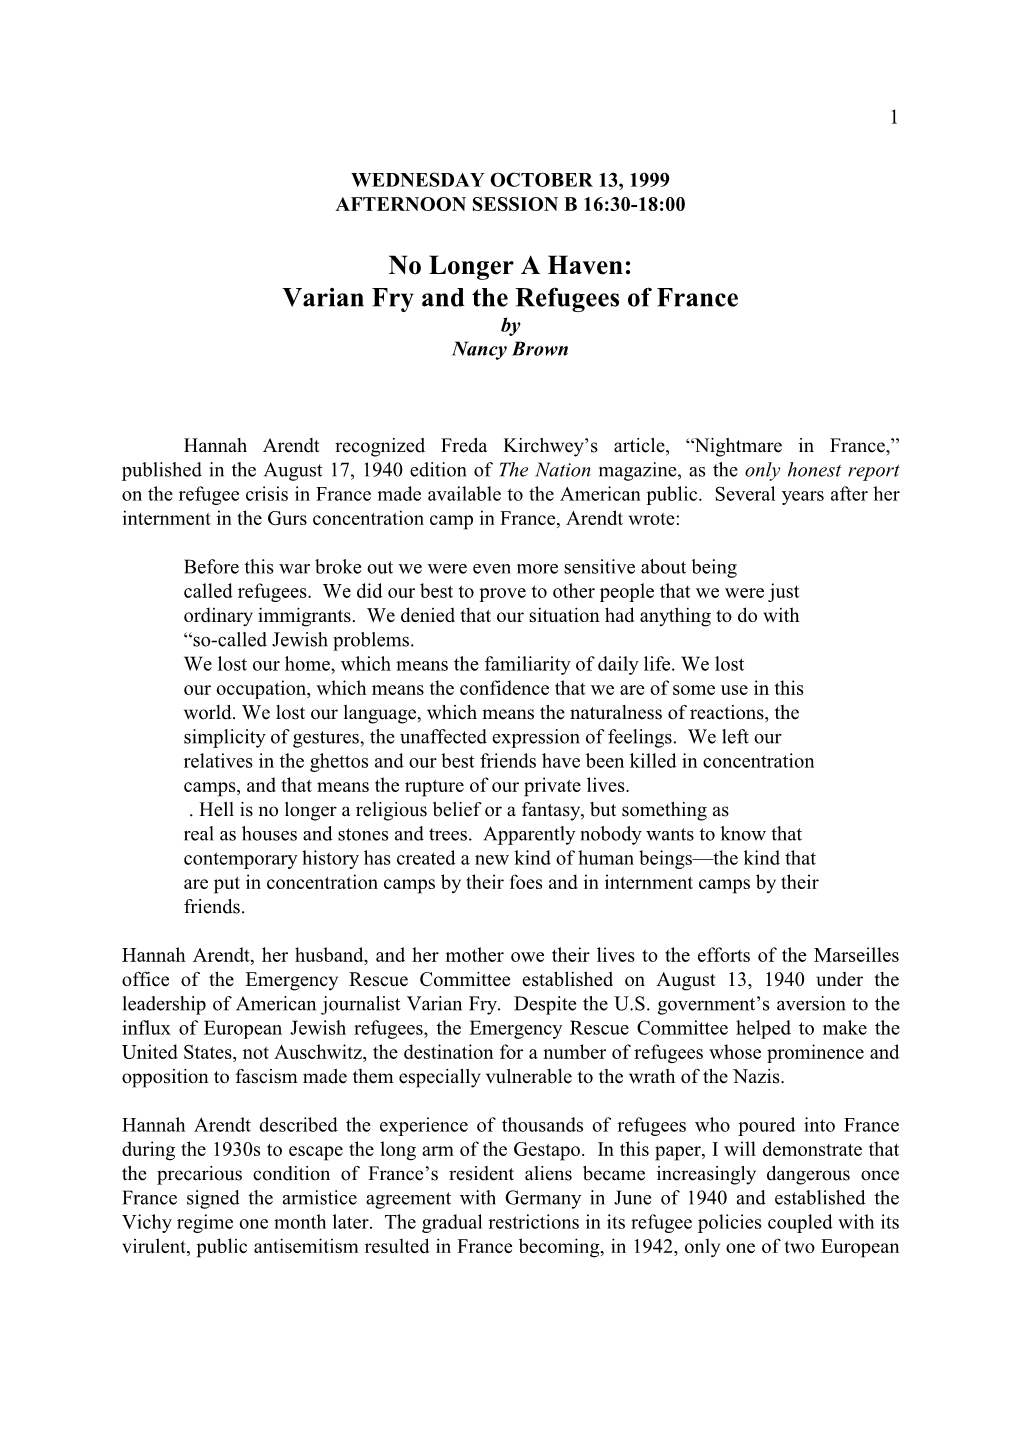 Varian Fry and the Refugees of France by Nancy Brown